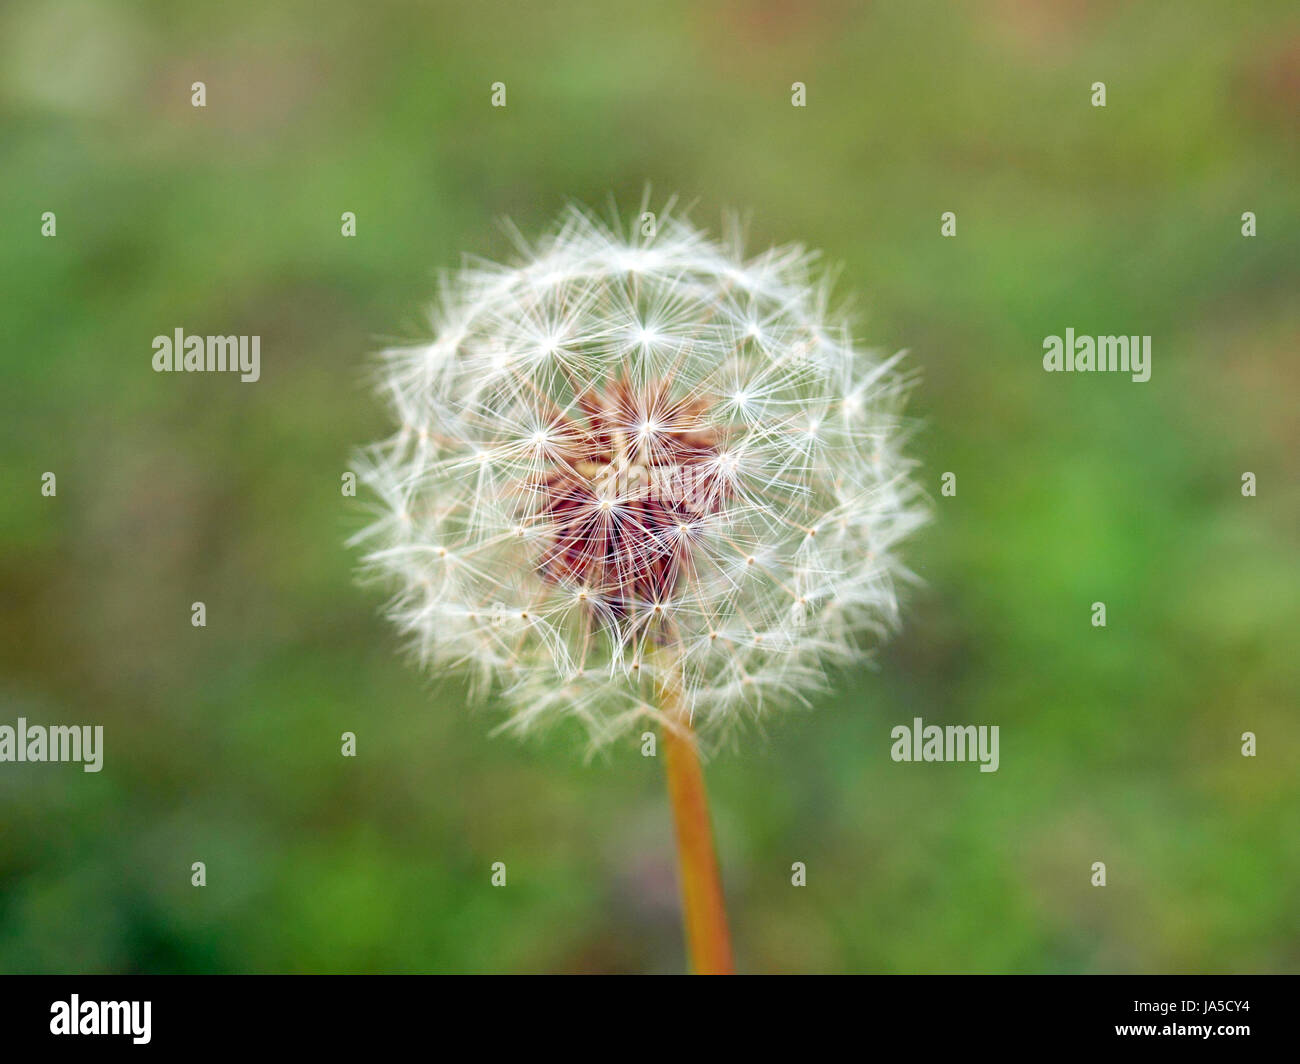 flower, plant, selective, meadow, grass, lawn, green, nature, natural, flower, Stock Photo